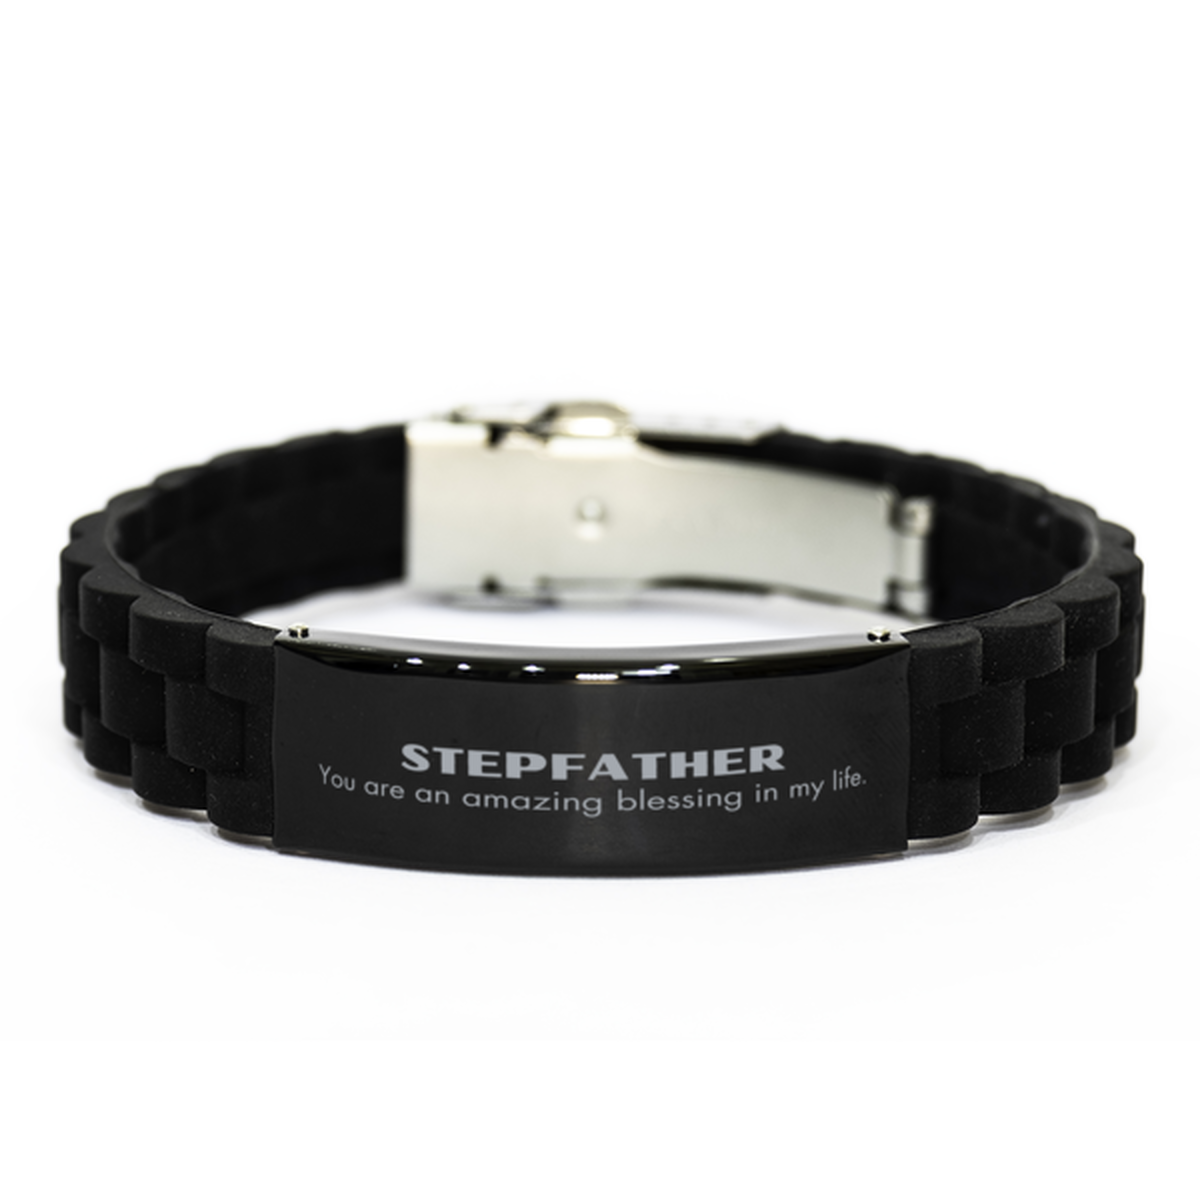 Stepfather Black Glidelock Clasp Bracelet, You are an amazing blessing in my life, Thank You Gifts For Stepfather, Inspirational Birthday Christmas Unique Gifts For Stepfather